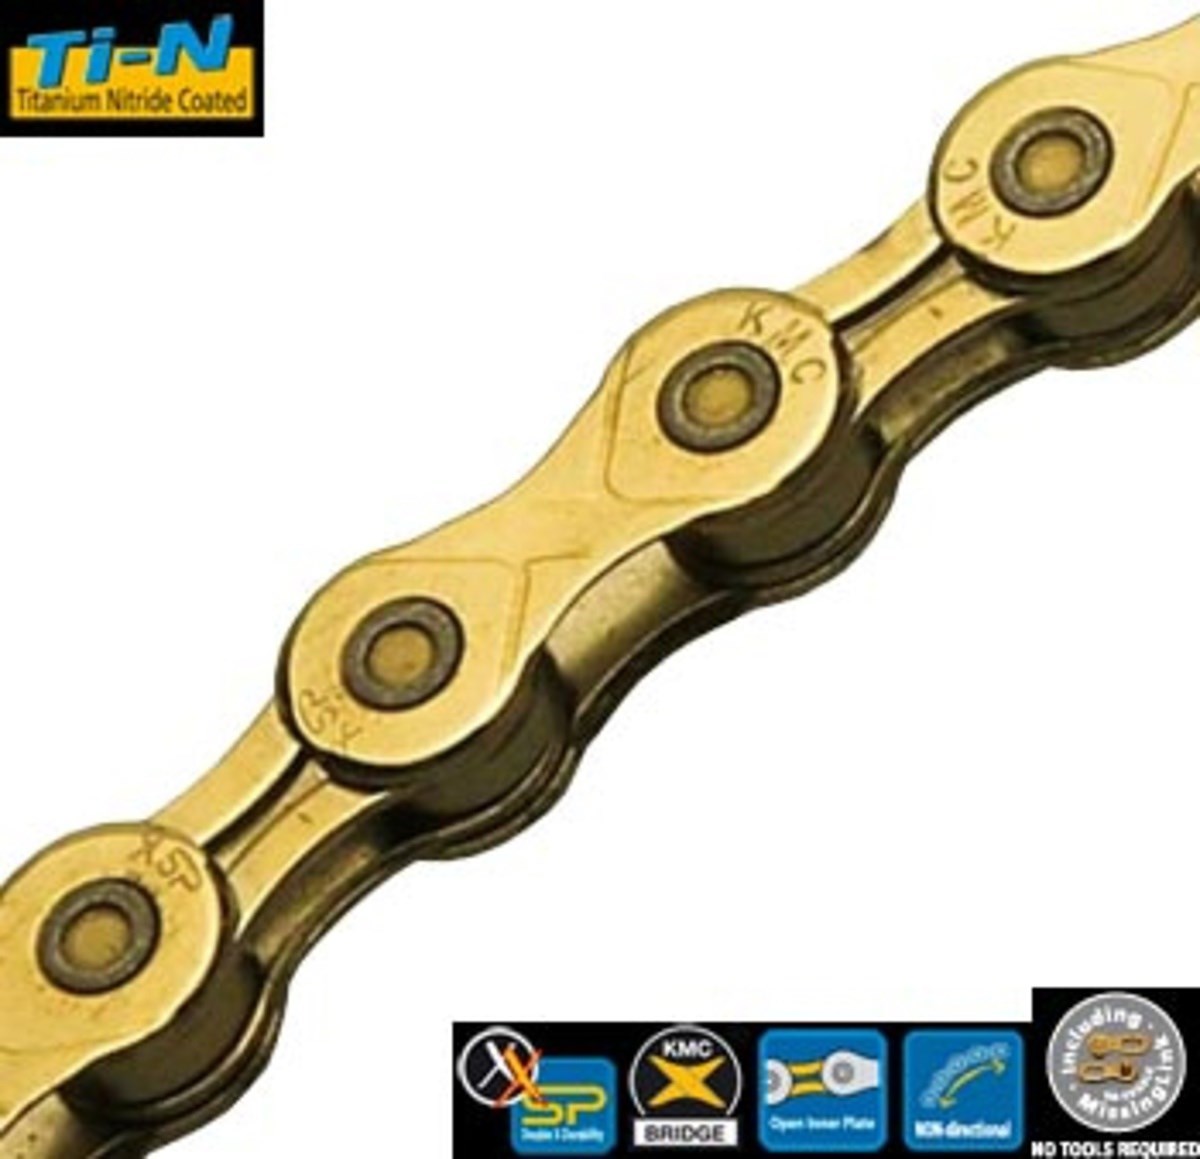 KMC X10-L 10 Speed Gold Chain product image